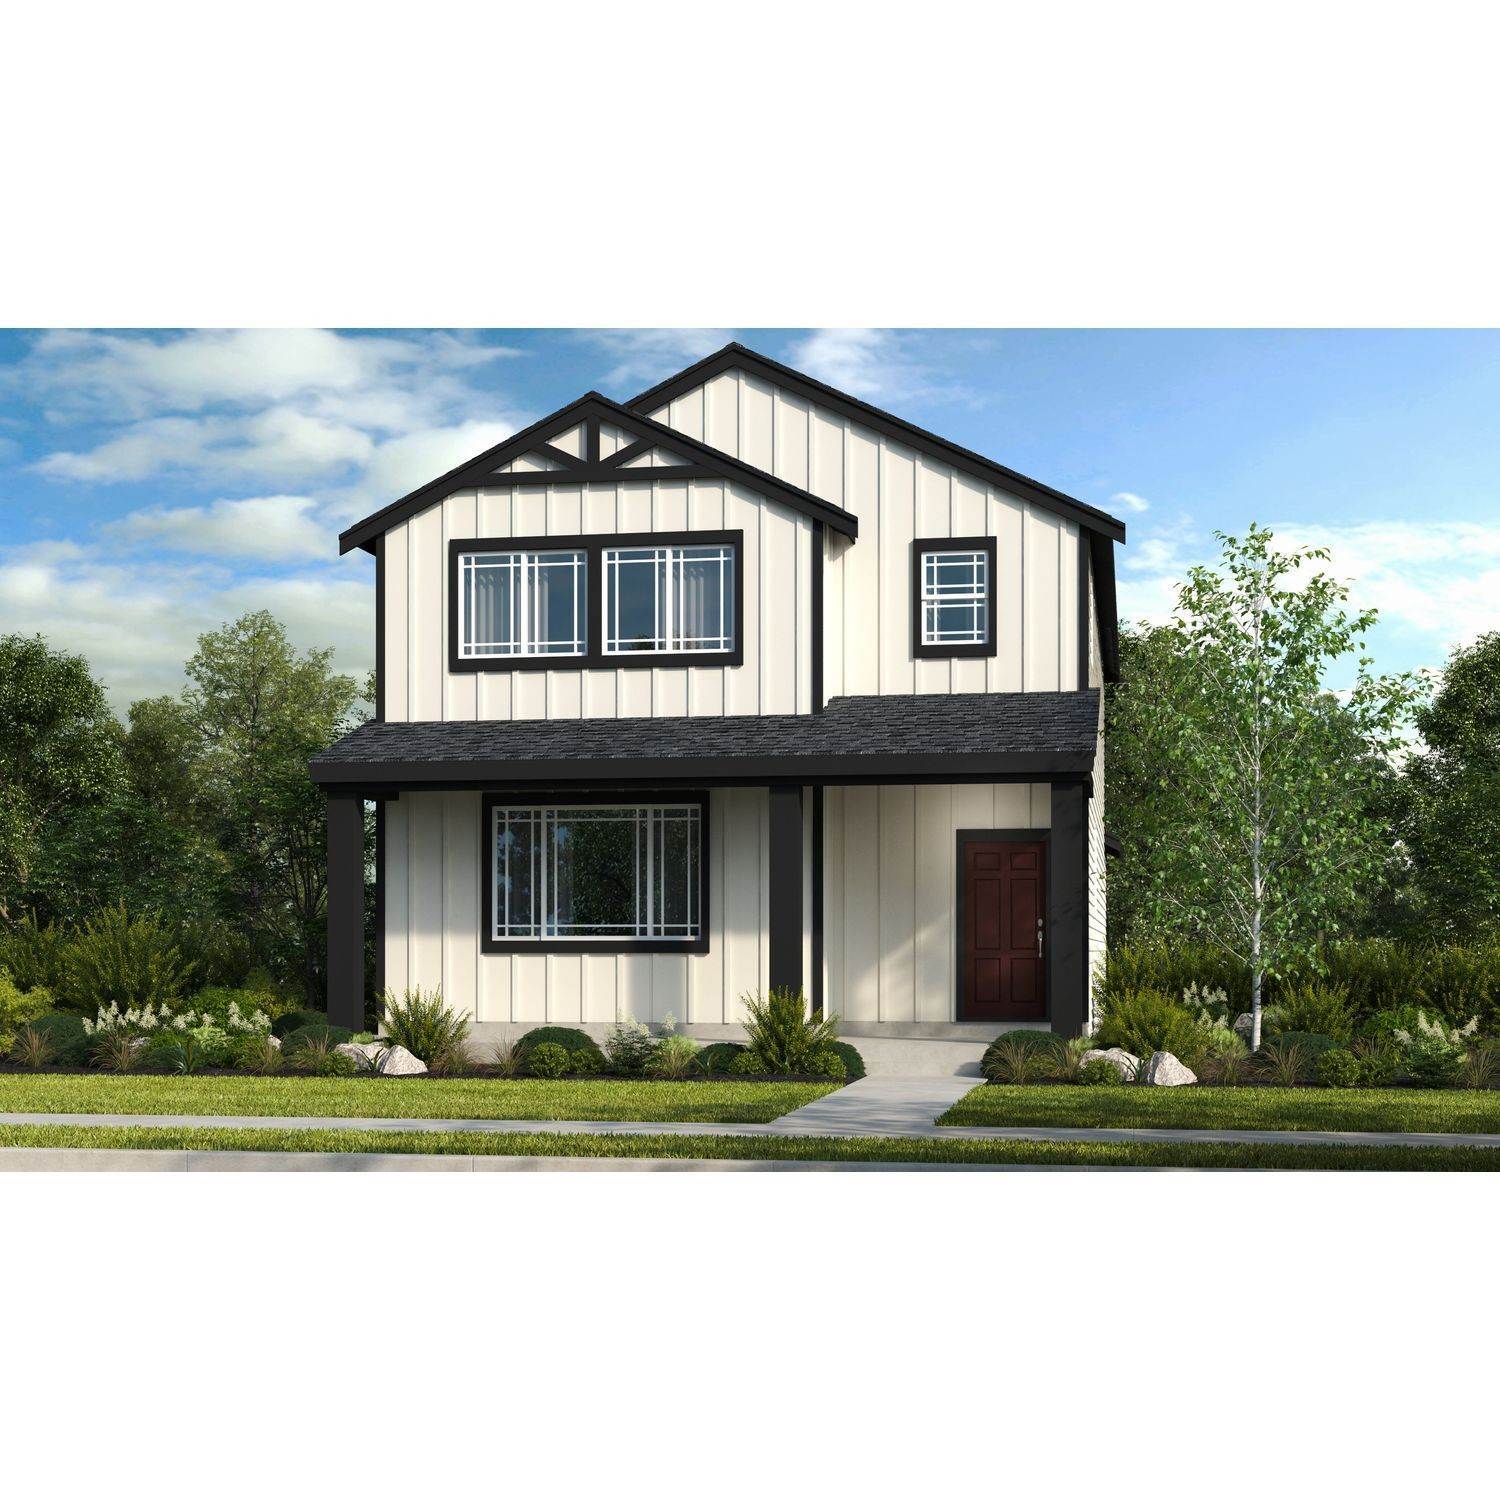 Single Family for Sale at Tigard, OR 97224